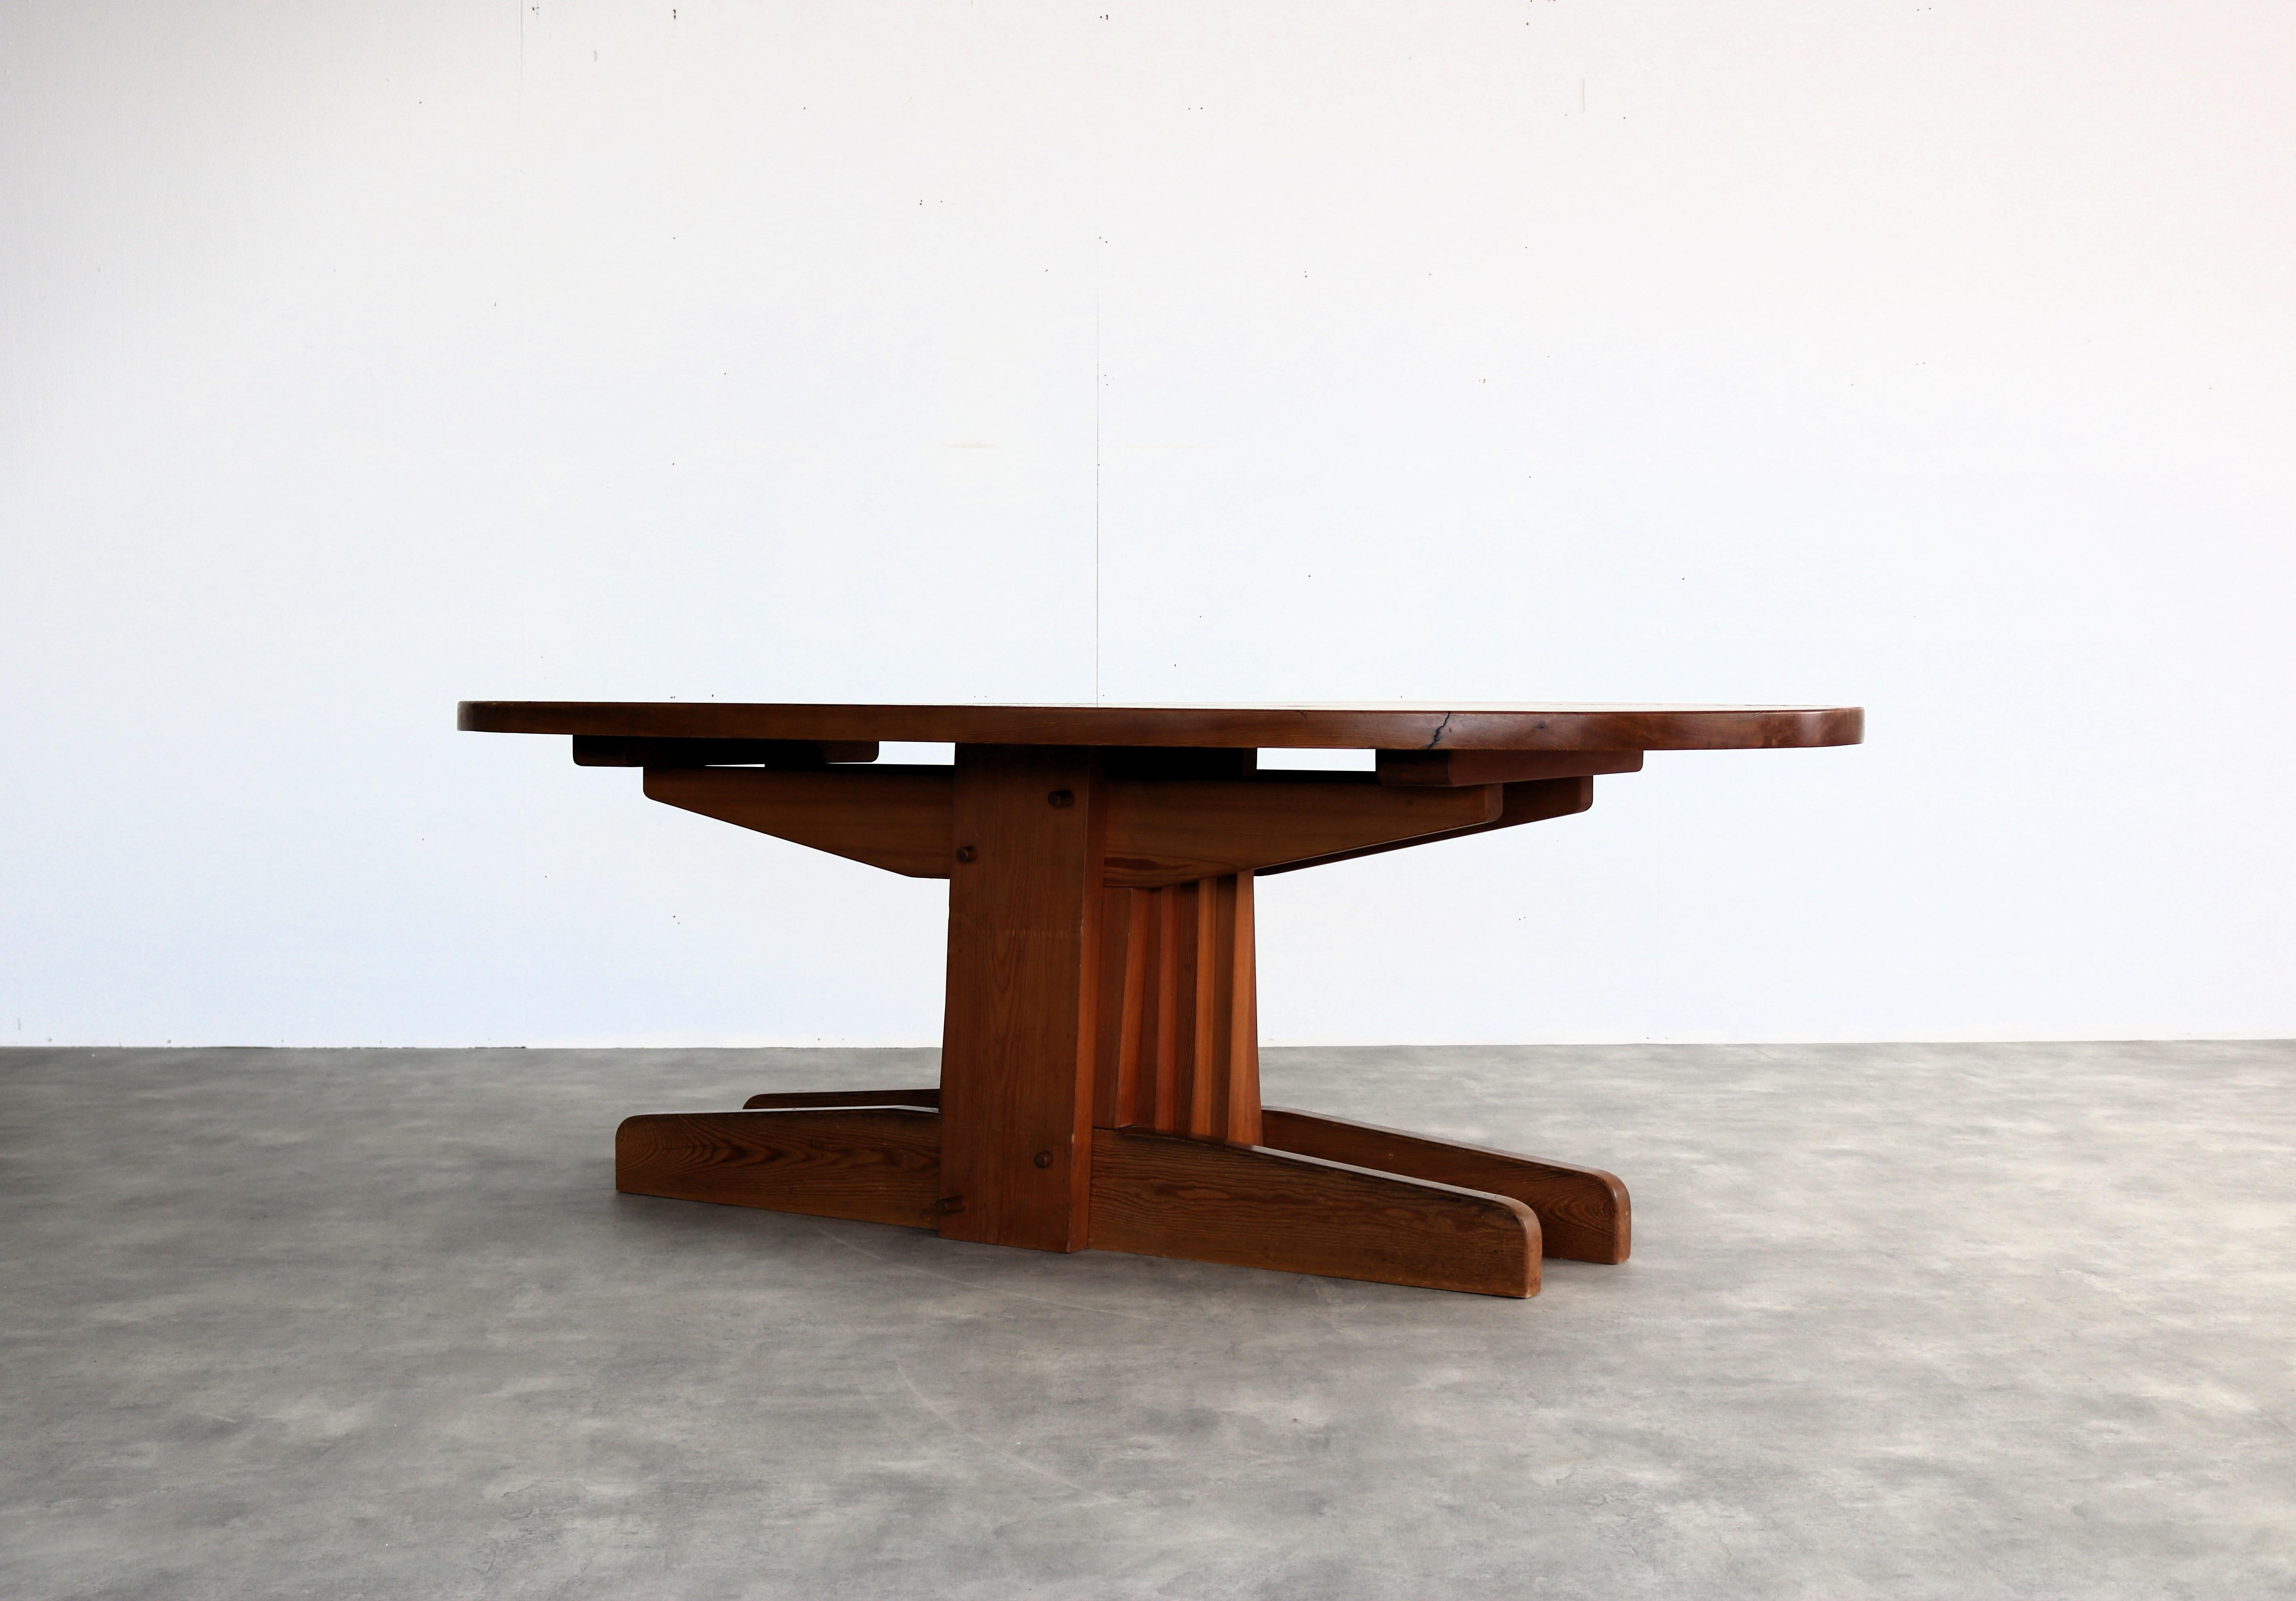 brutalist dining table  table  60s  oval

period  60's
design  unknown
condition  good  light signs of use
size  74 x 218 x 106 (hxwxd)

details  pine;

article number  2322